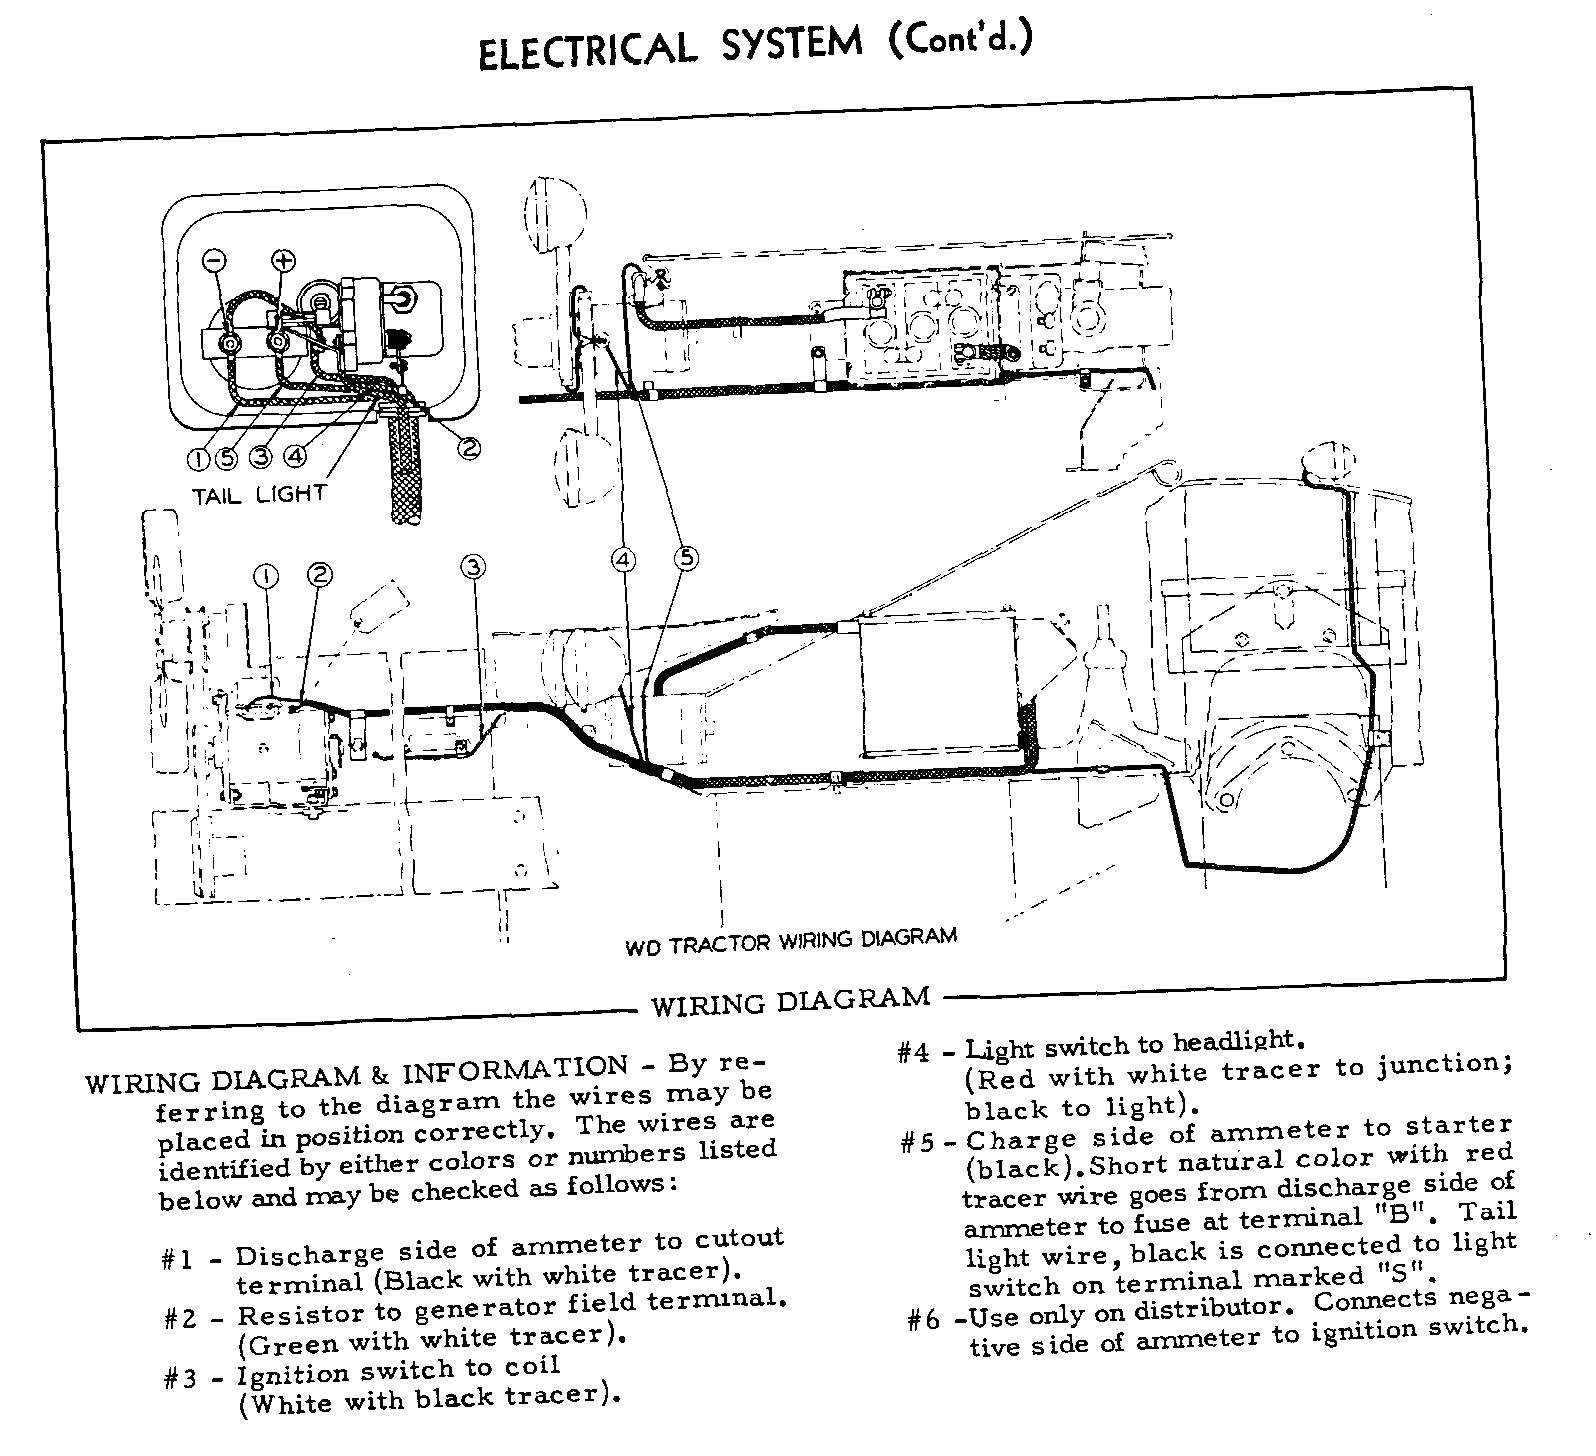 6 volt to 12 volt conversion wiring diagram unique allis chalmers b wiring diagram fitfathers of